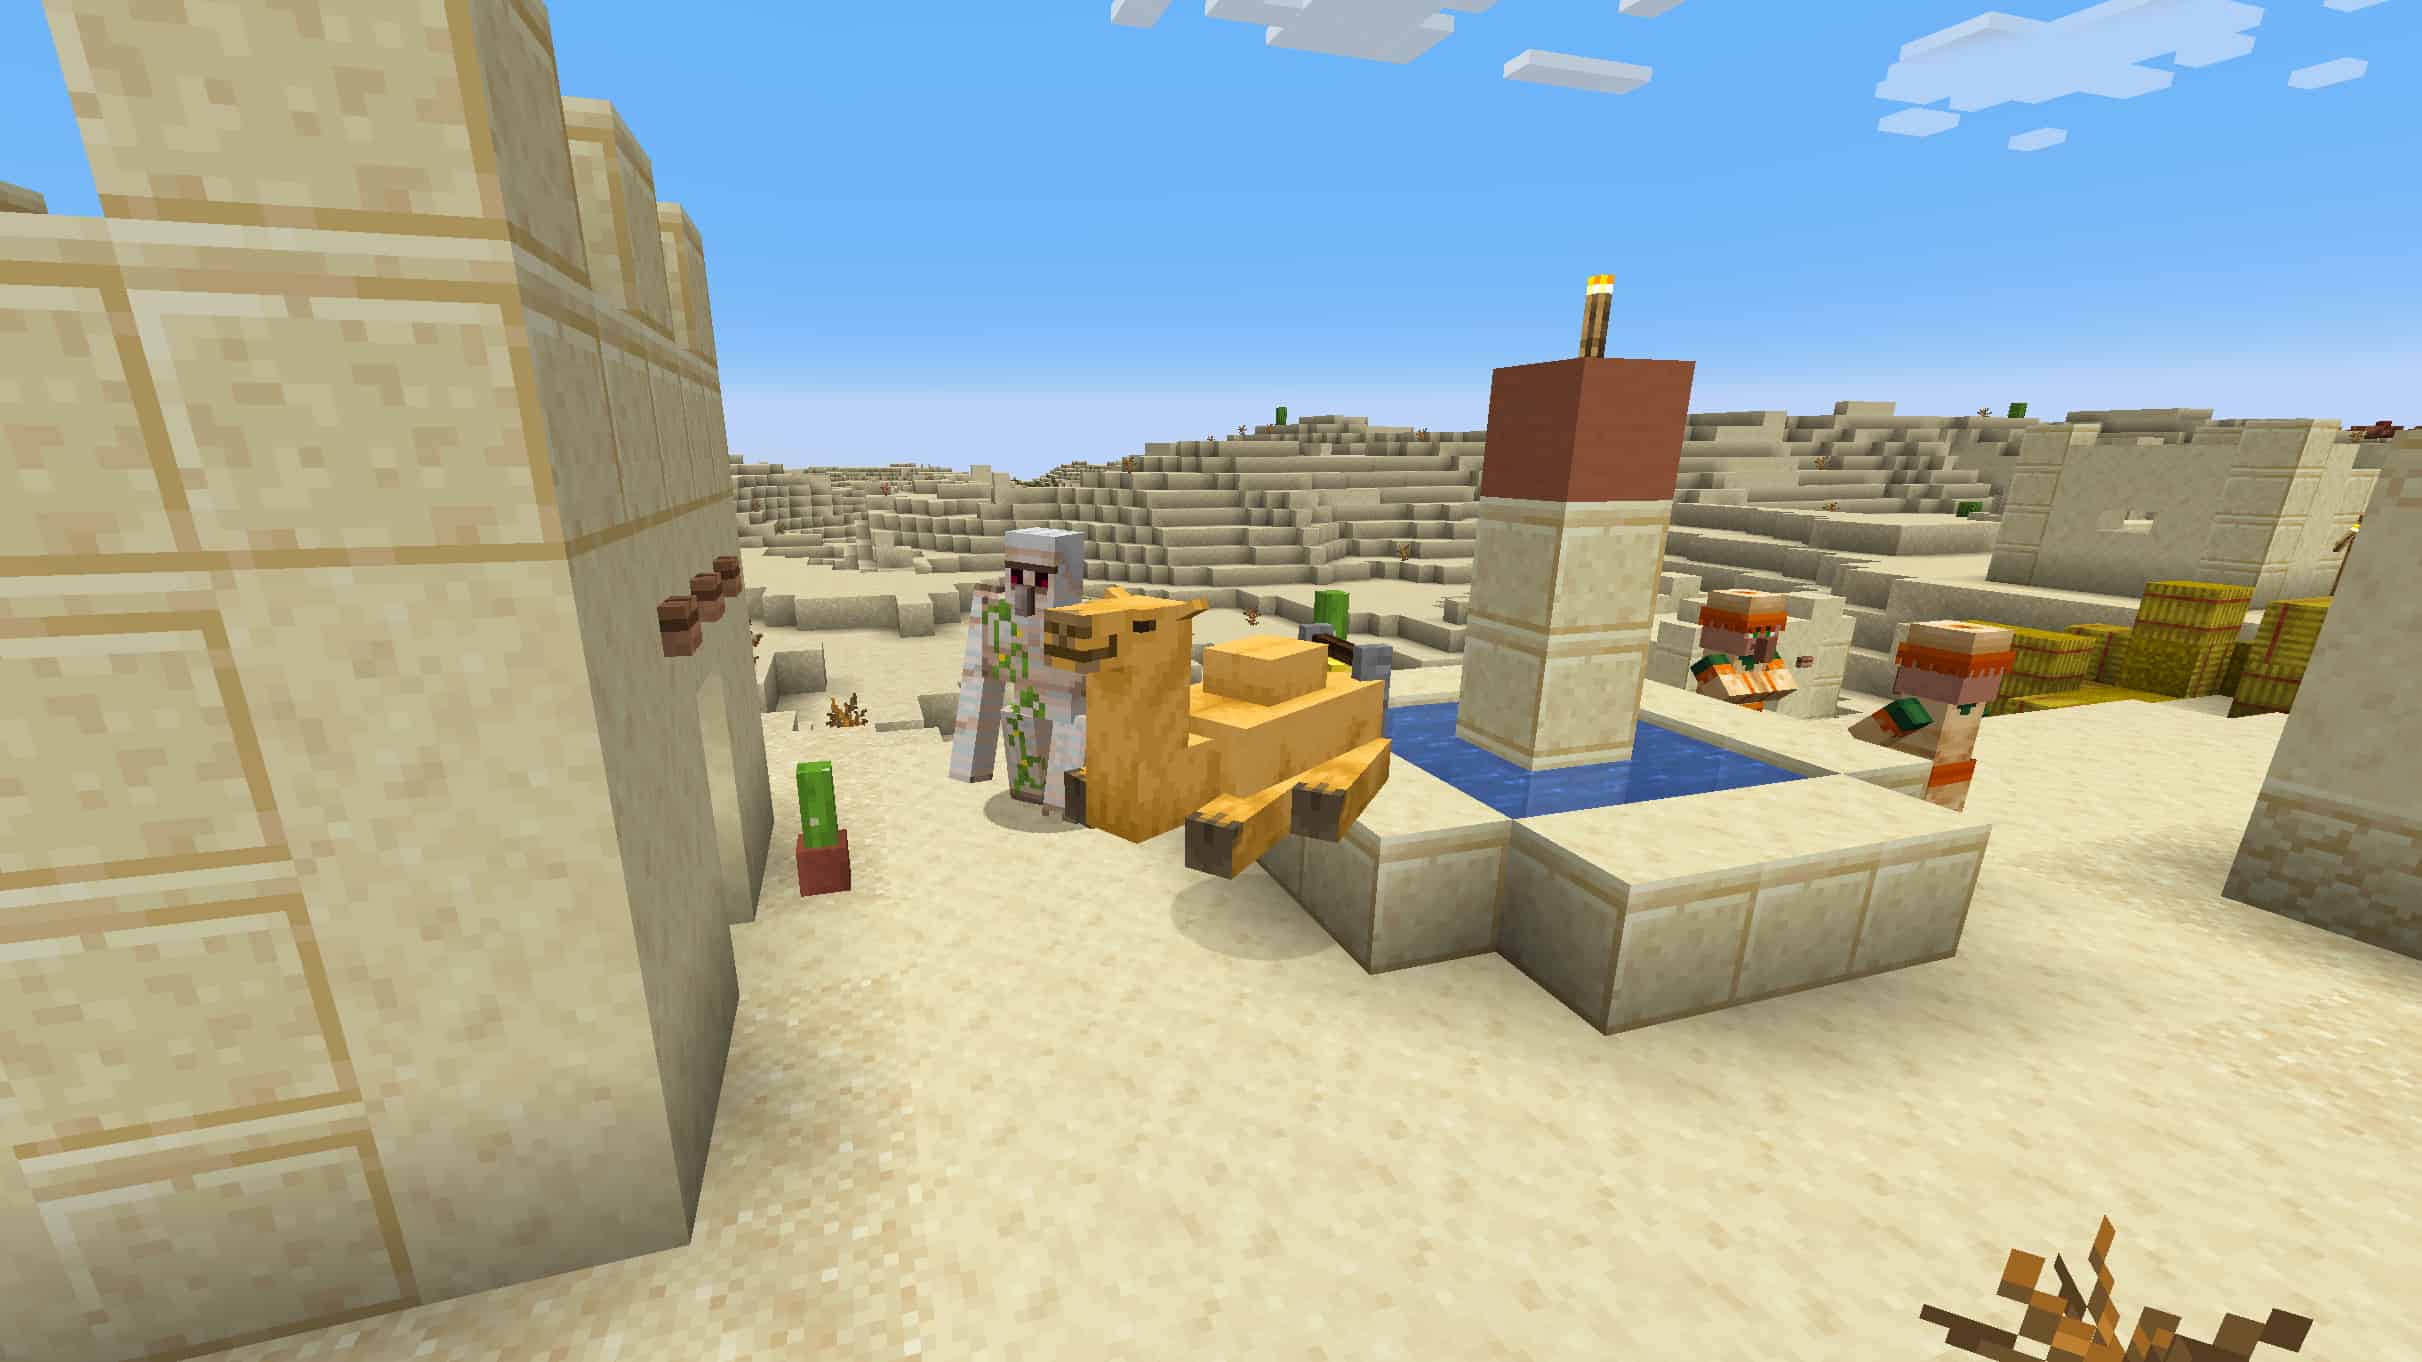 Minecraft camels guide: A camel sits on the lip of a fountain in a desert village.